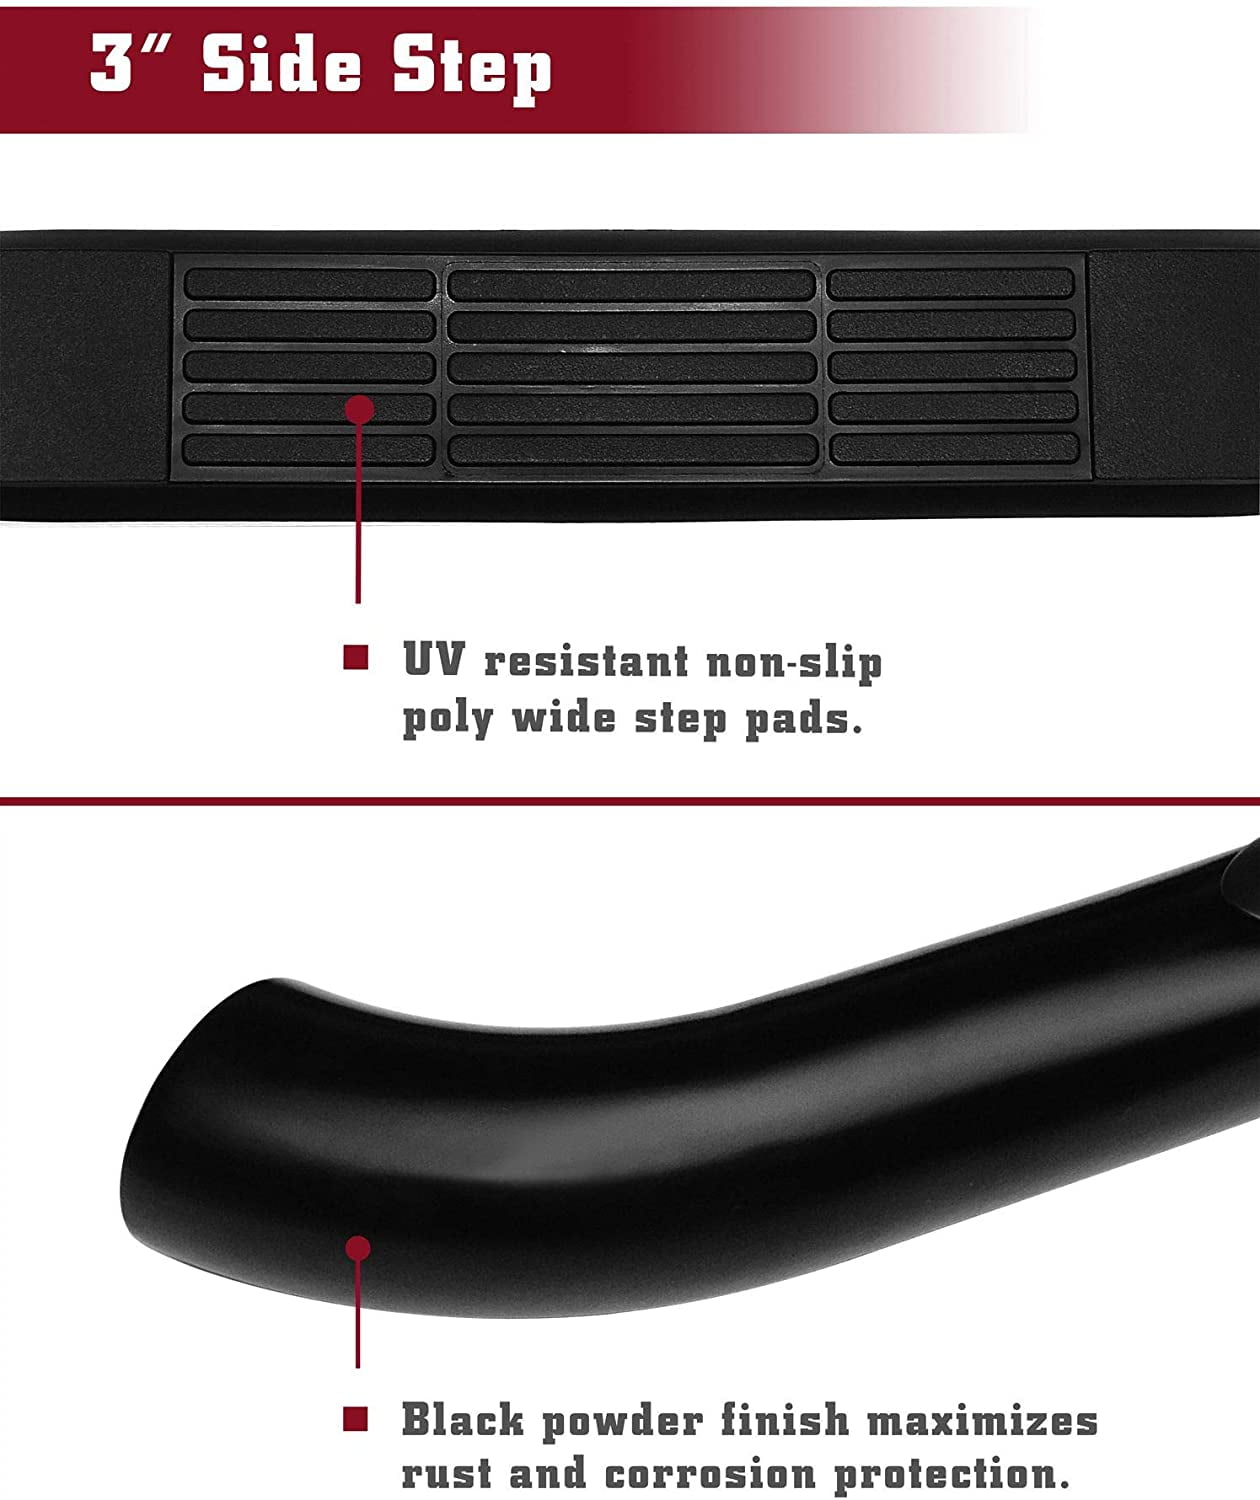 TAC Running Boards Compatible with 2021-2023 Ford Bronco Sport SUV 5.5 –  TACUSA